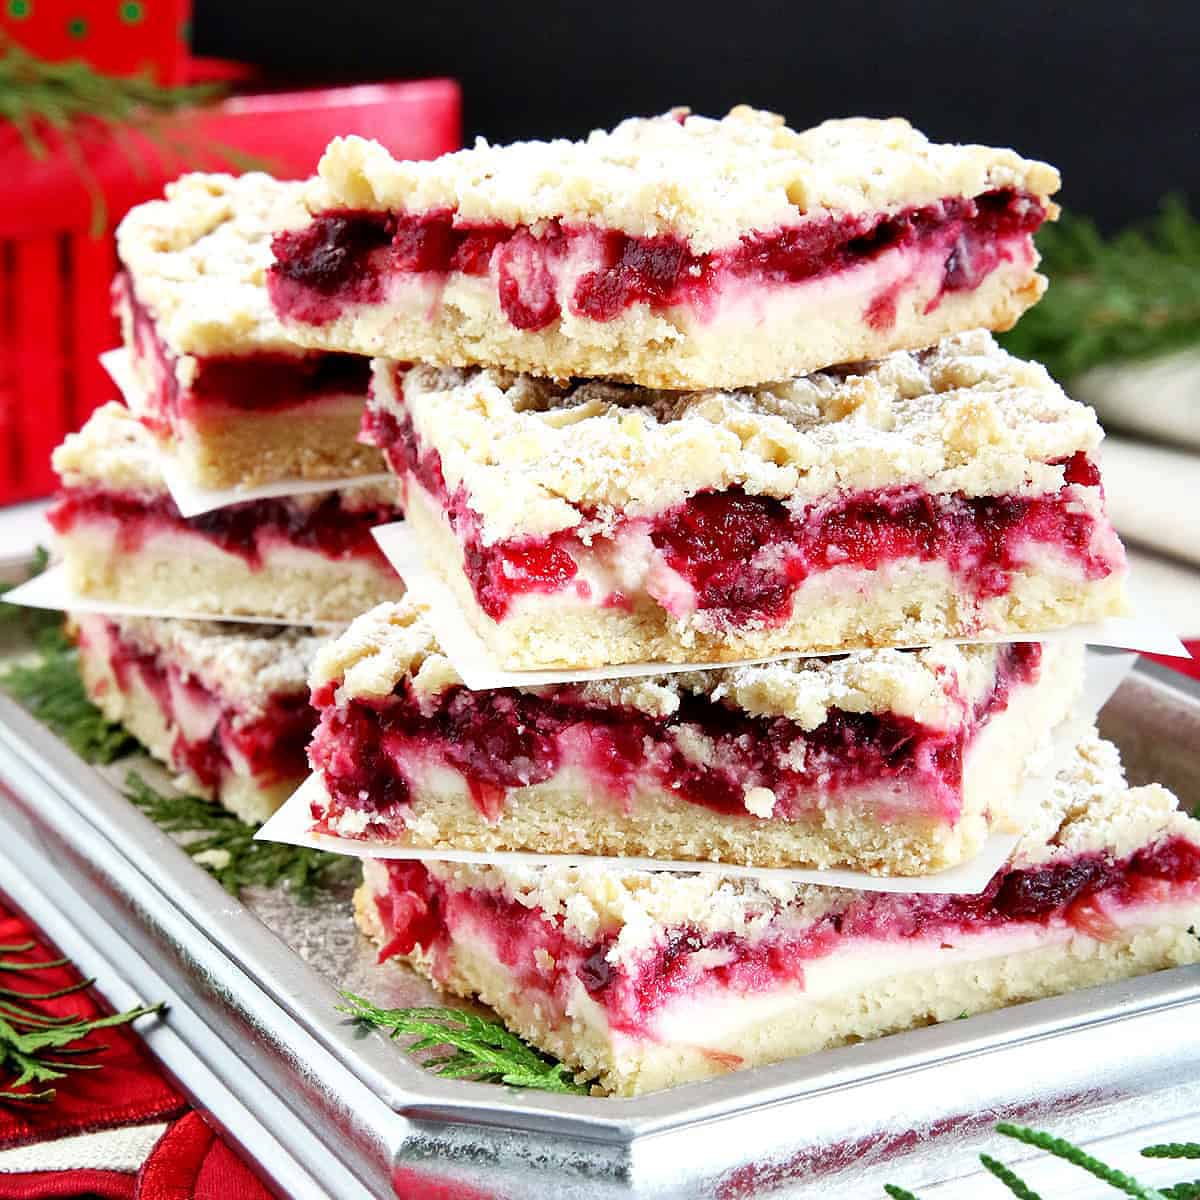 These Cranberry Bars are perfect for the holidays, featuring a tart cranberry filling, soft and crumbly shortbread layer and cream cheese filling to balance it.